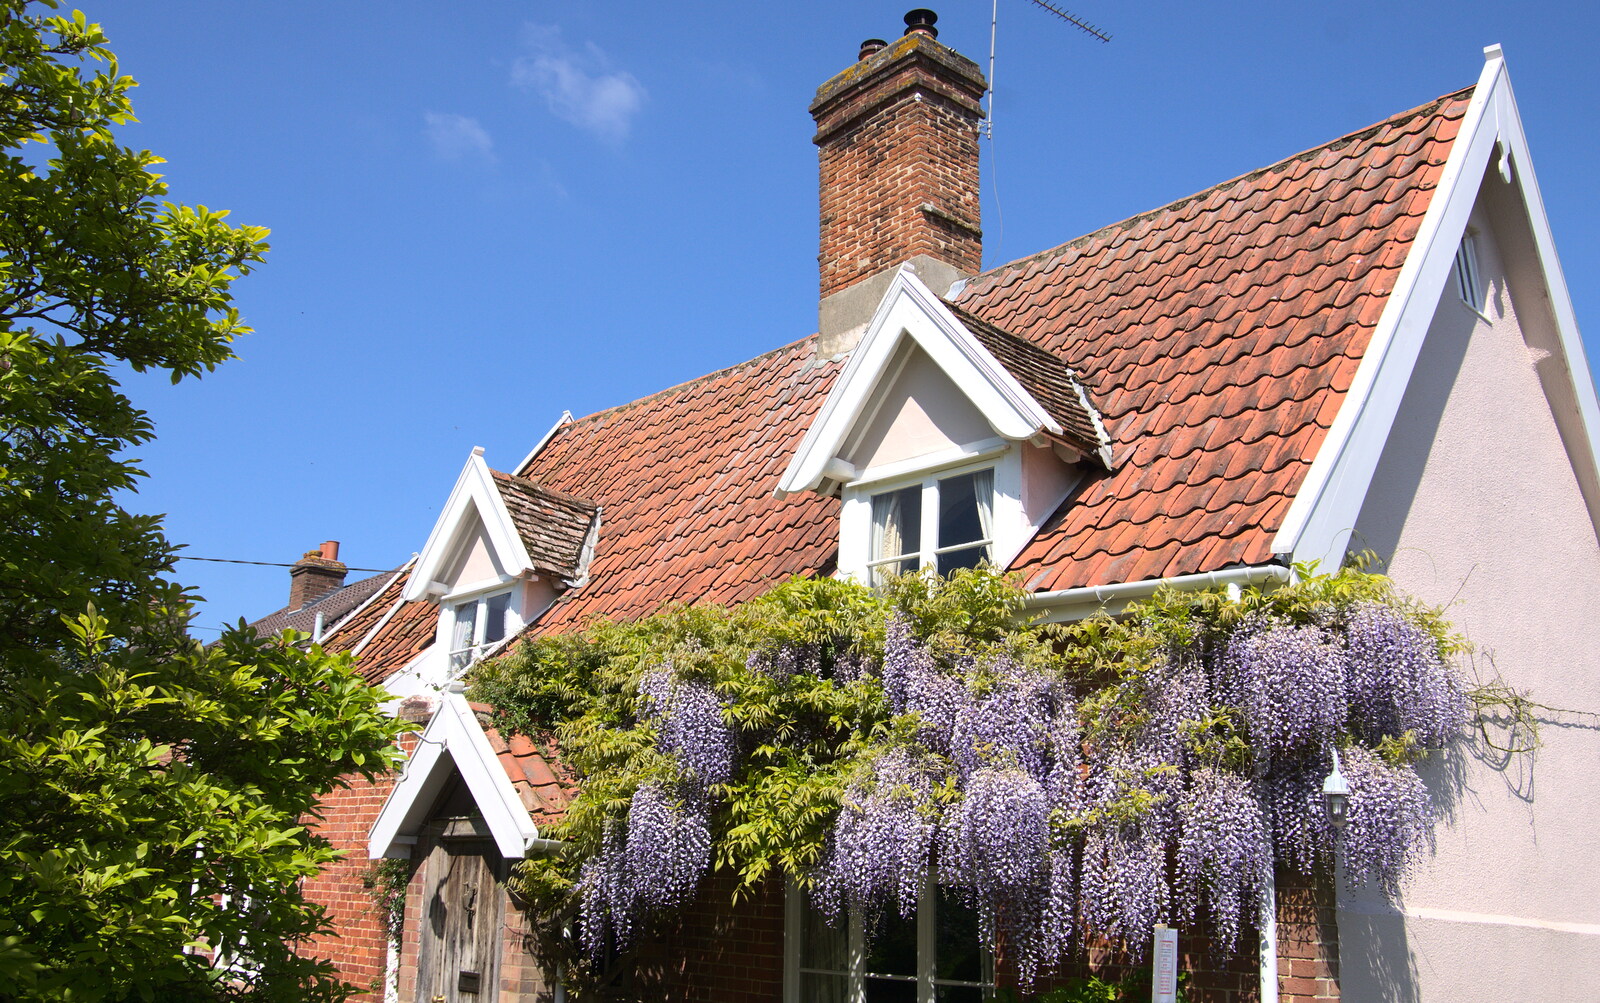 Wisteria on the cottage next door from A Right Royal Wedding at the Village Hall, Brome, Suffolk - 19th May 2018